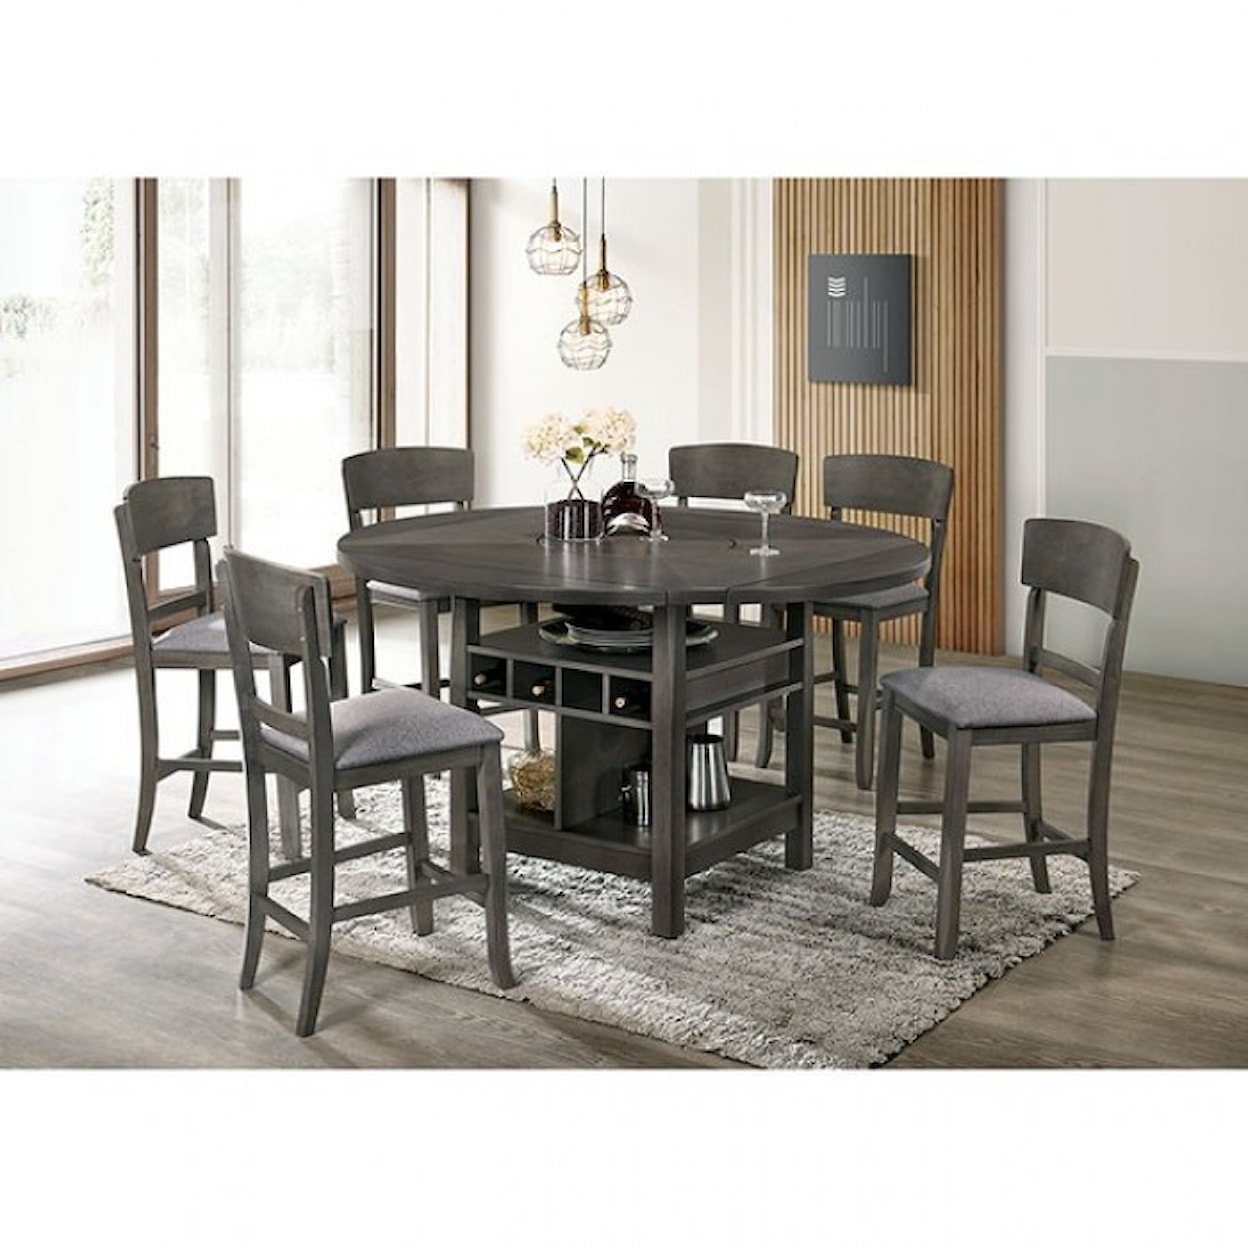 Furniture of America Stacie Counter Height Dining Table